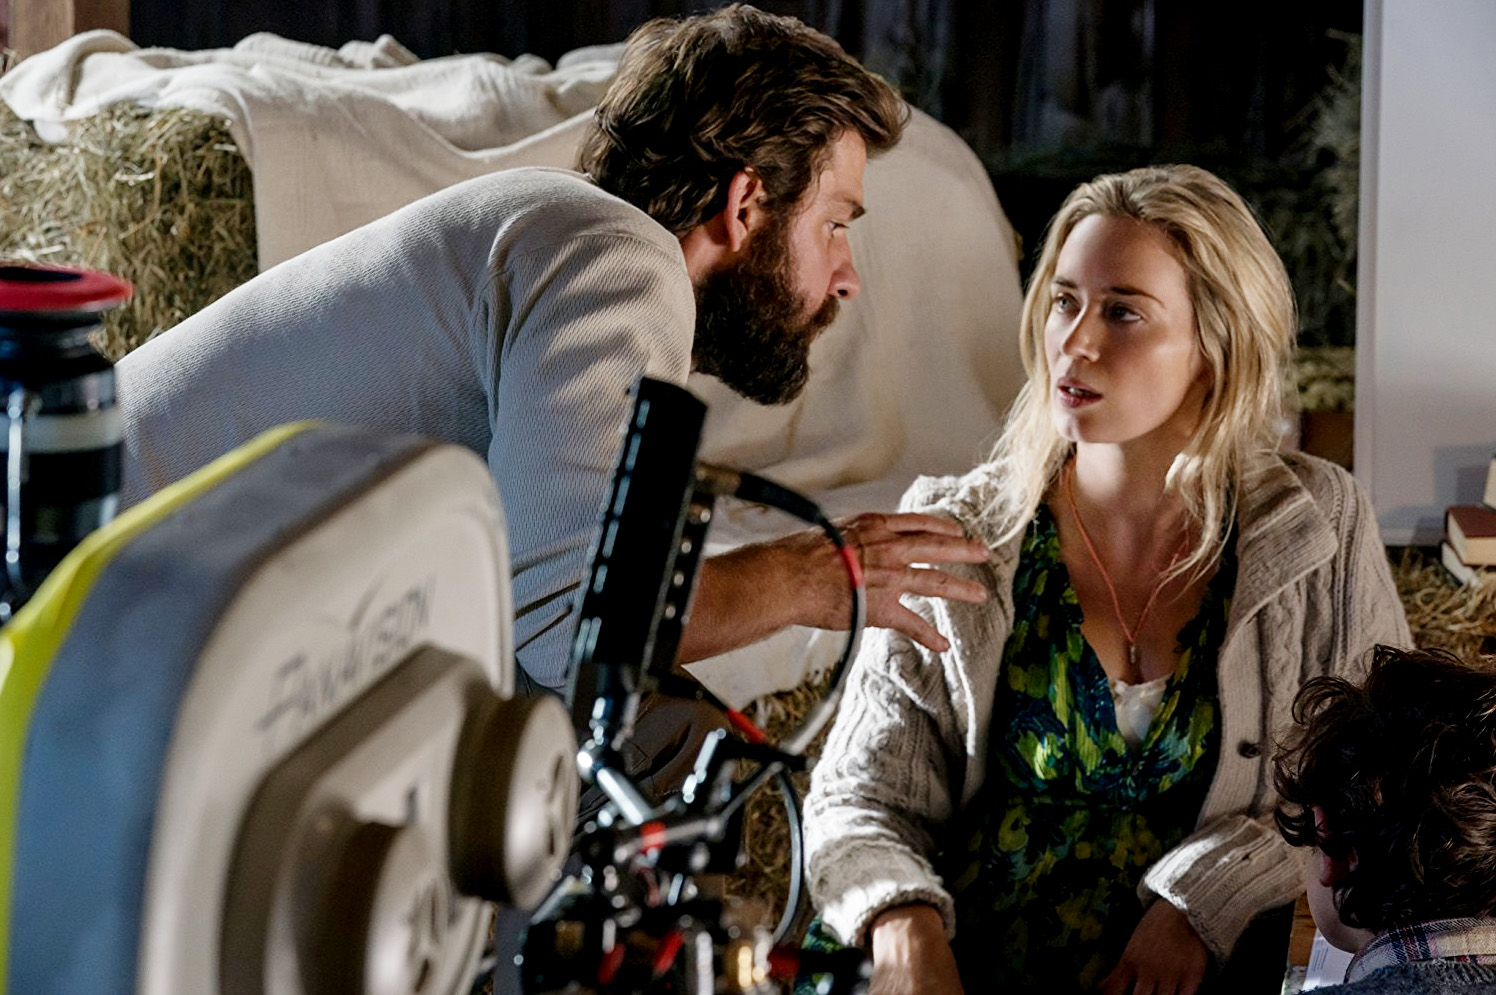 PHOTO: John Krasinski and Emily Blunt in the movie "A Quiet Place."